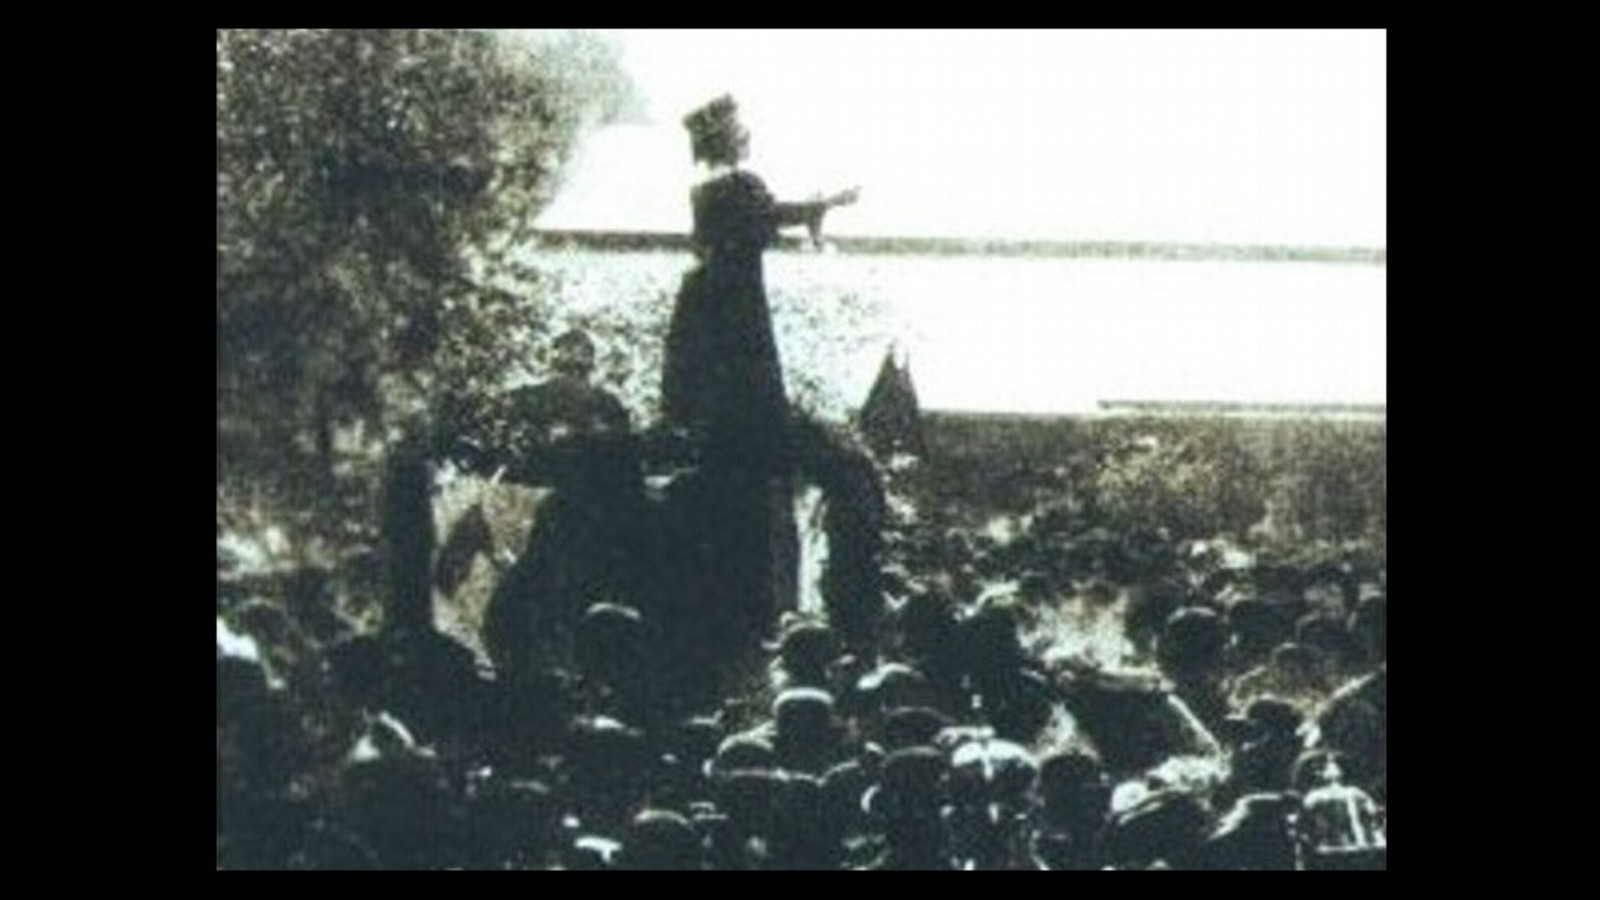 Rosa Luxemburg speaking to workers in Cologne